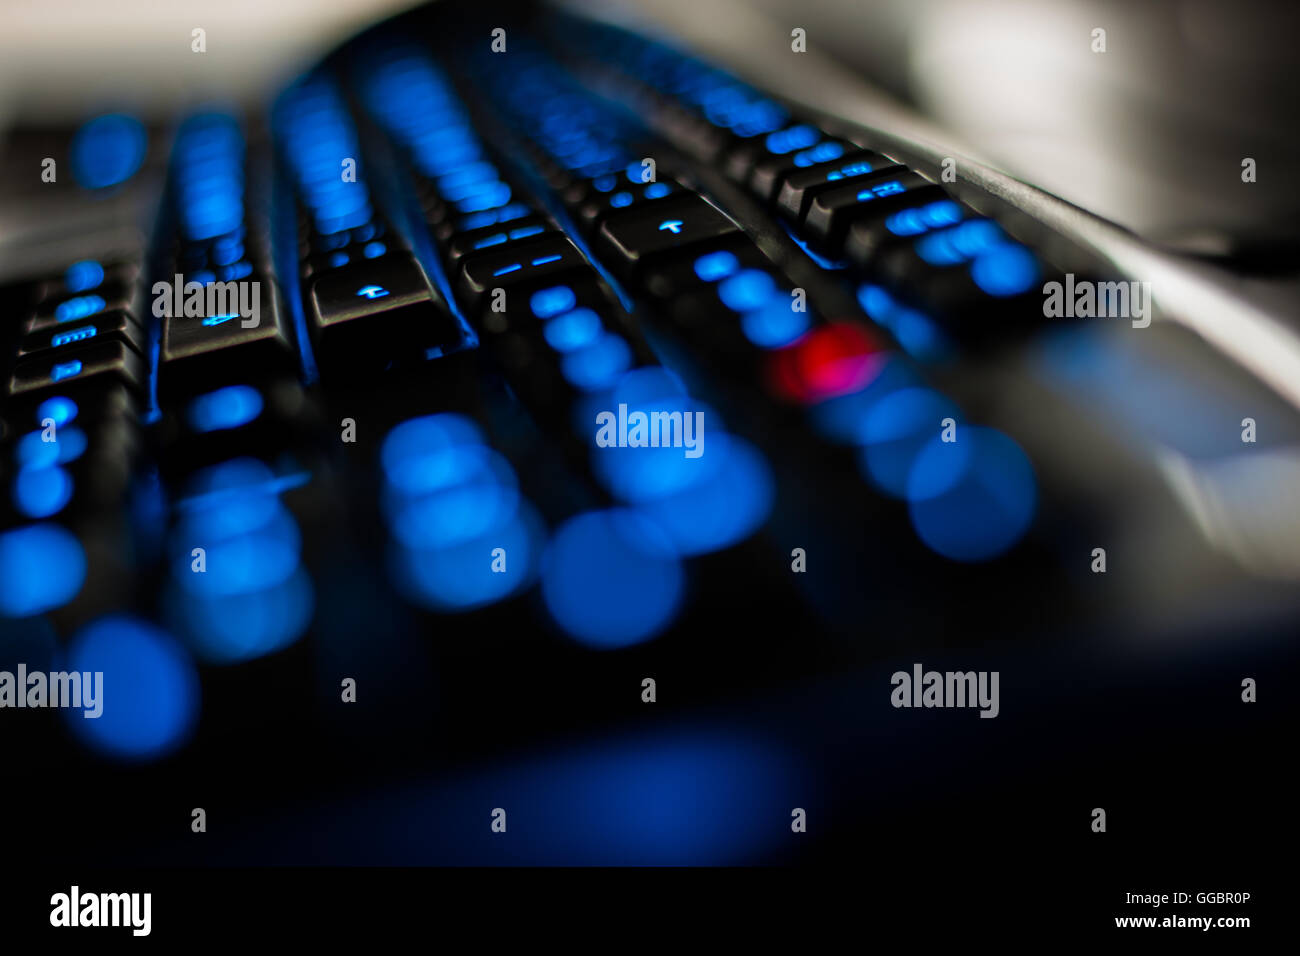 Computer keyboard glows red with a blue illuminated euro symbol. News Photo  - Getty Images